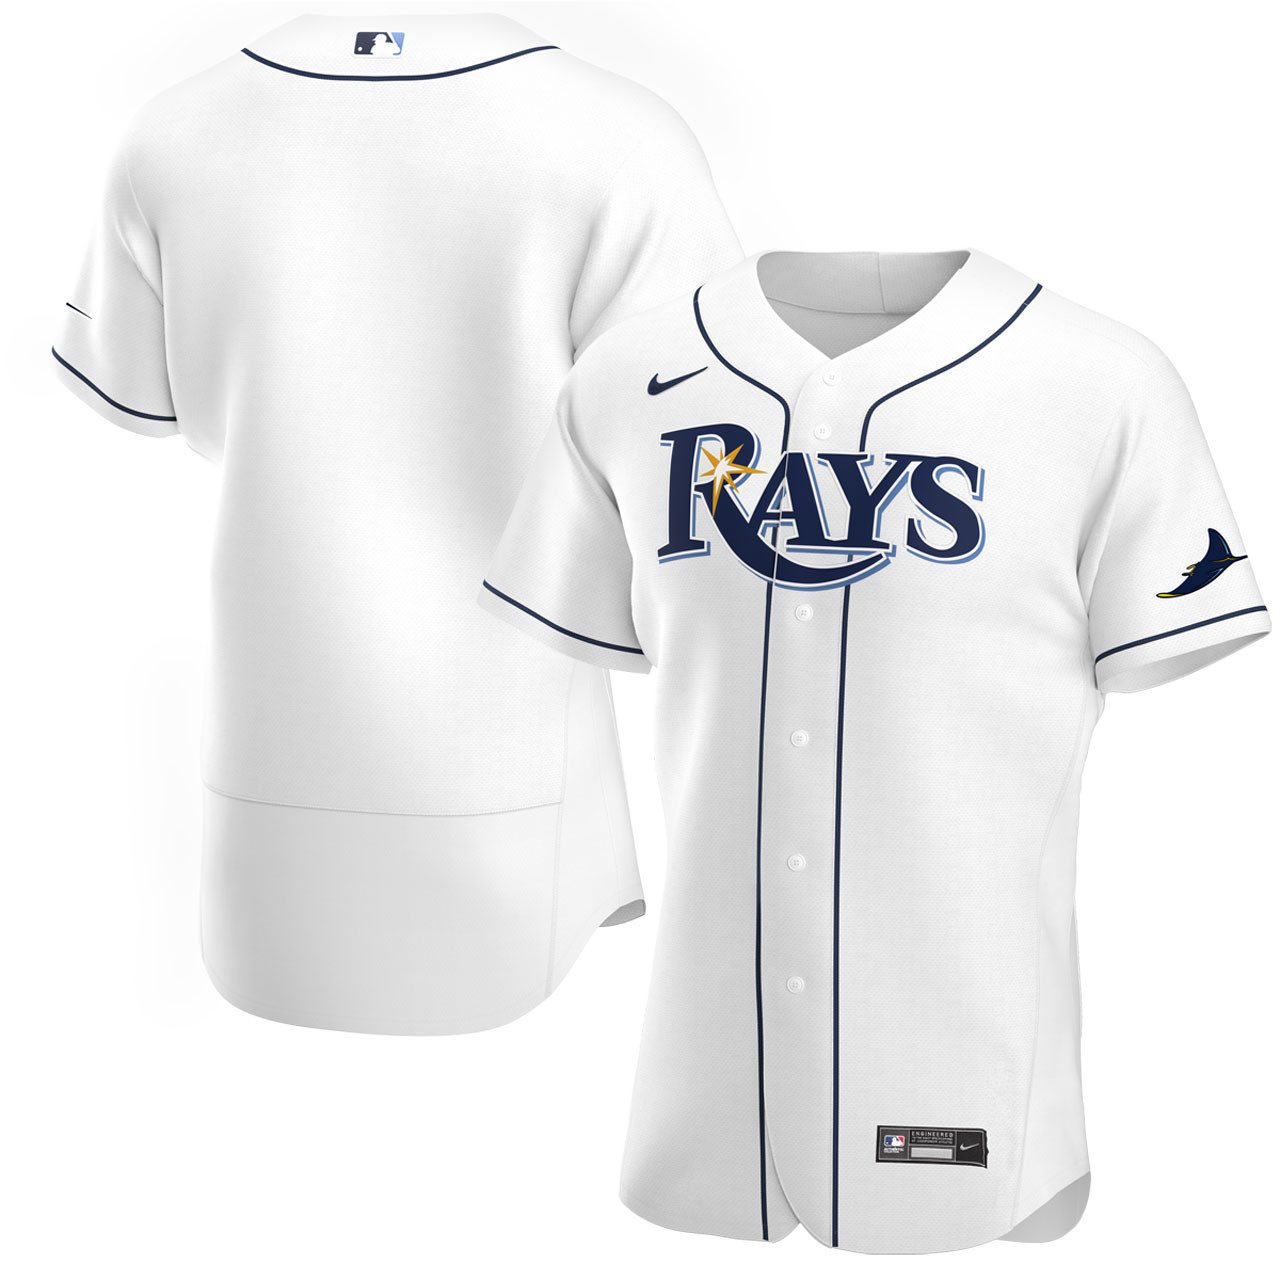 Tampa Bay Rays White Home Authentic Jersey by Nike